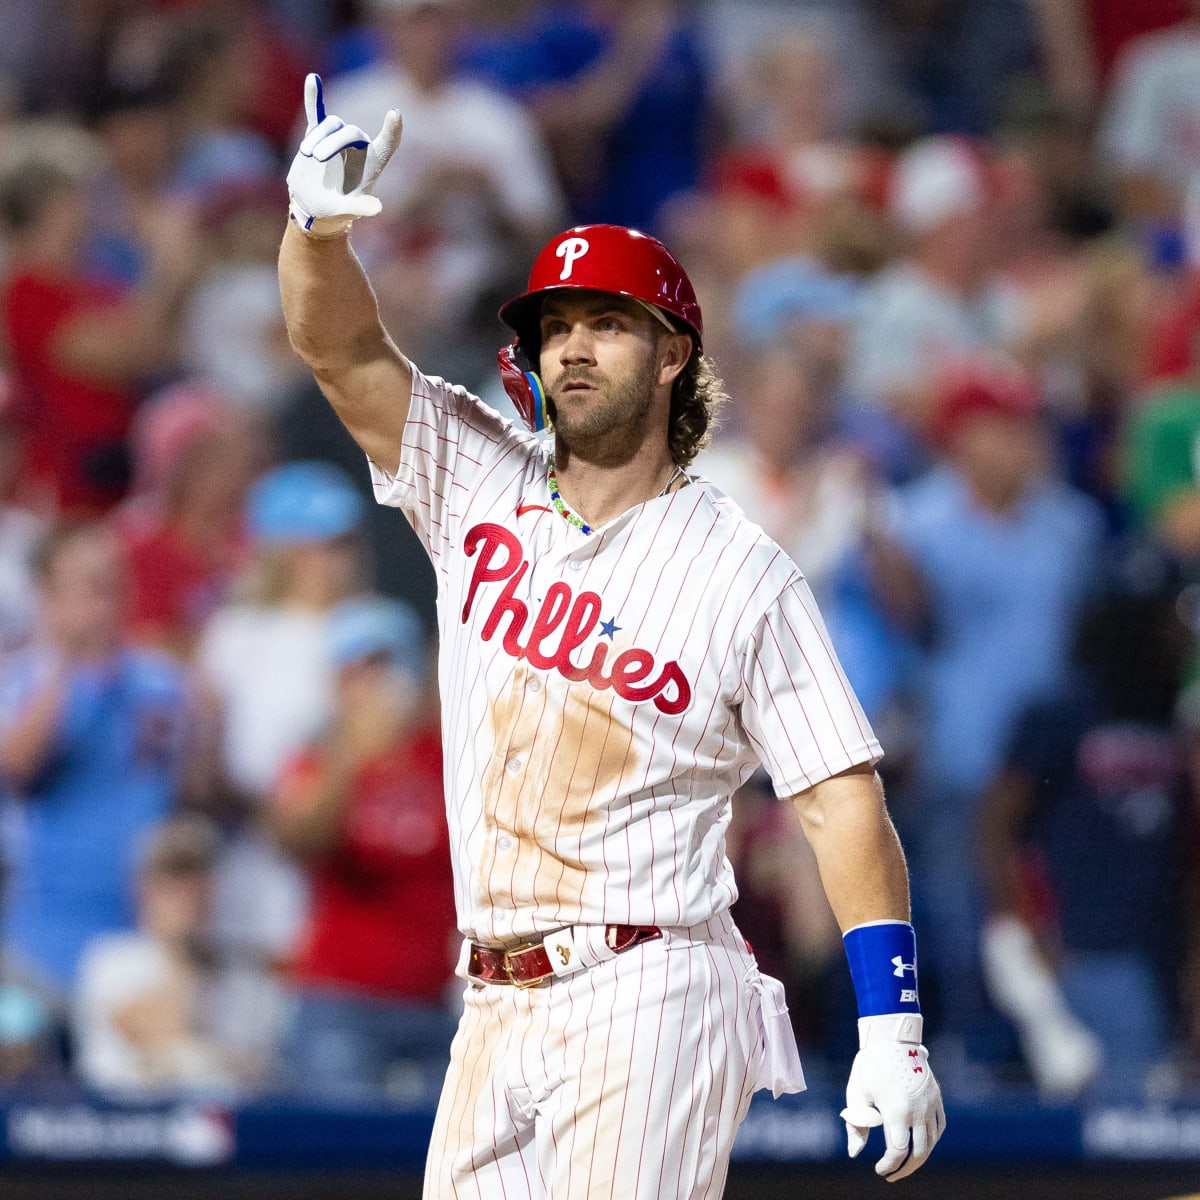 Is Bryce Harper still on a path to hit 500 home runs?